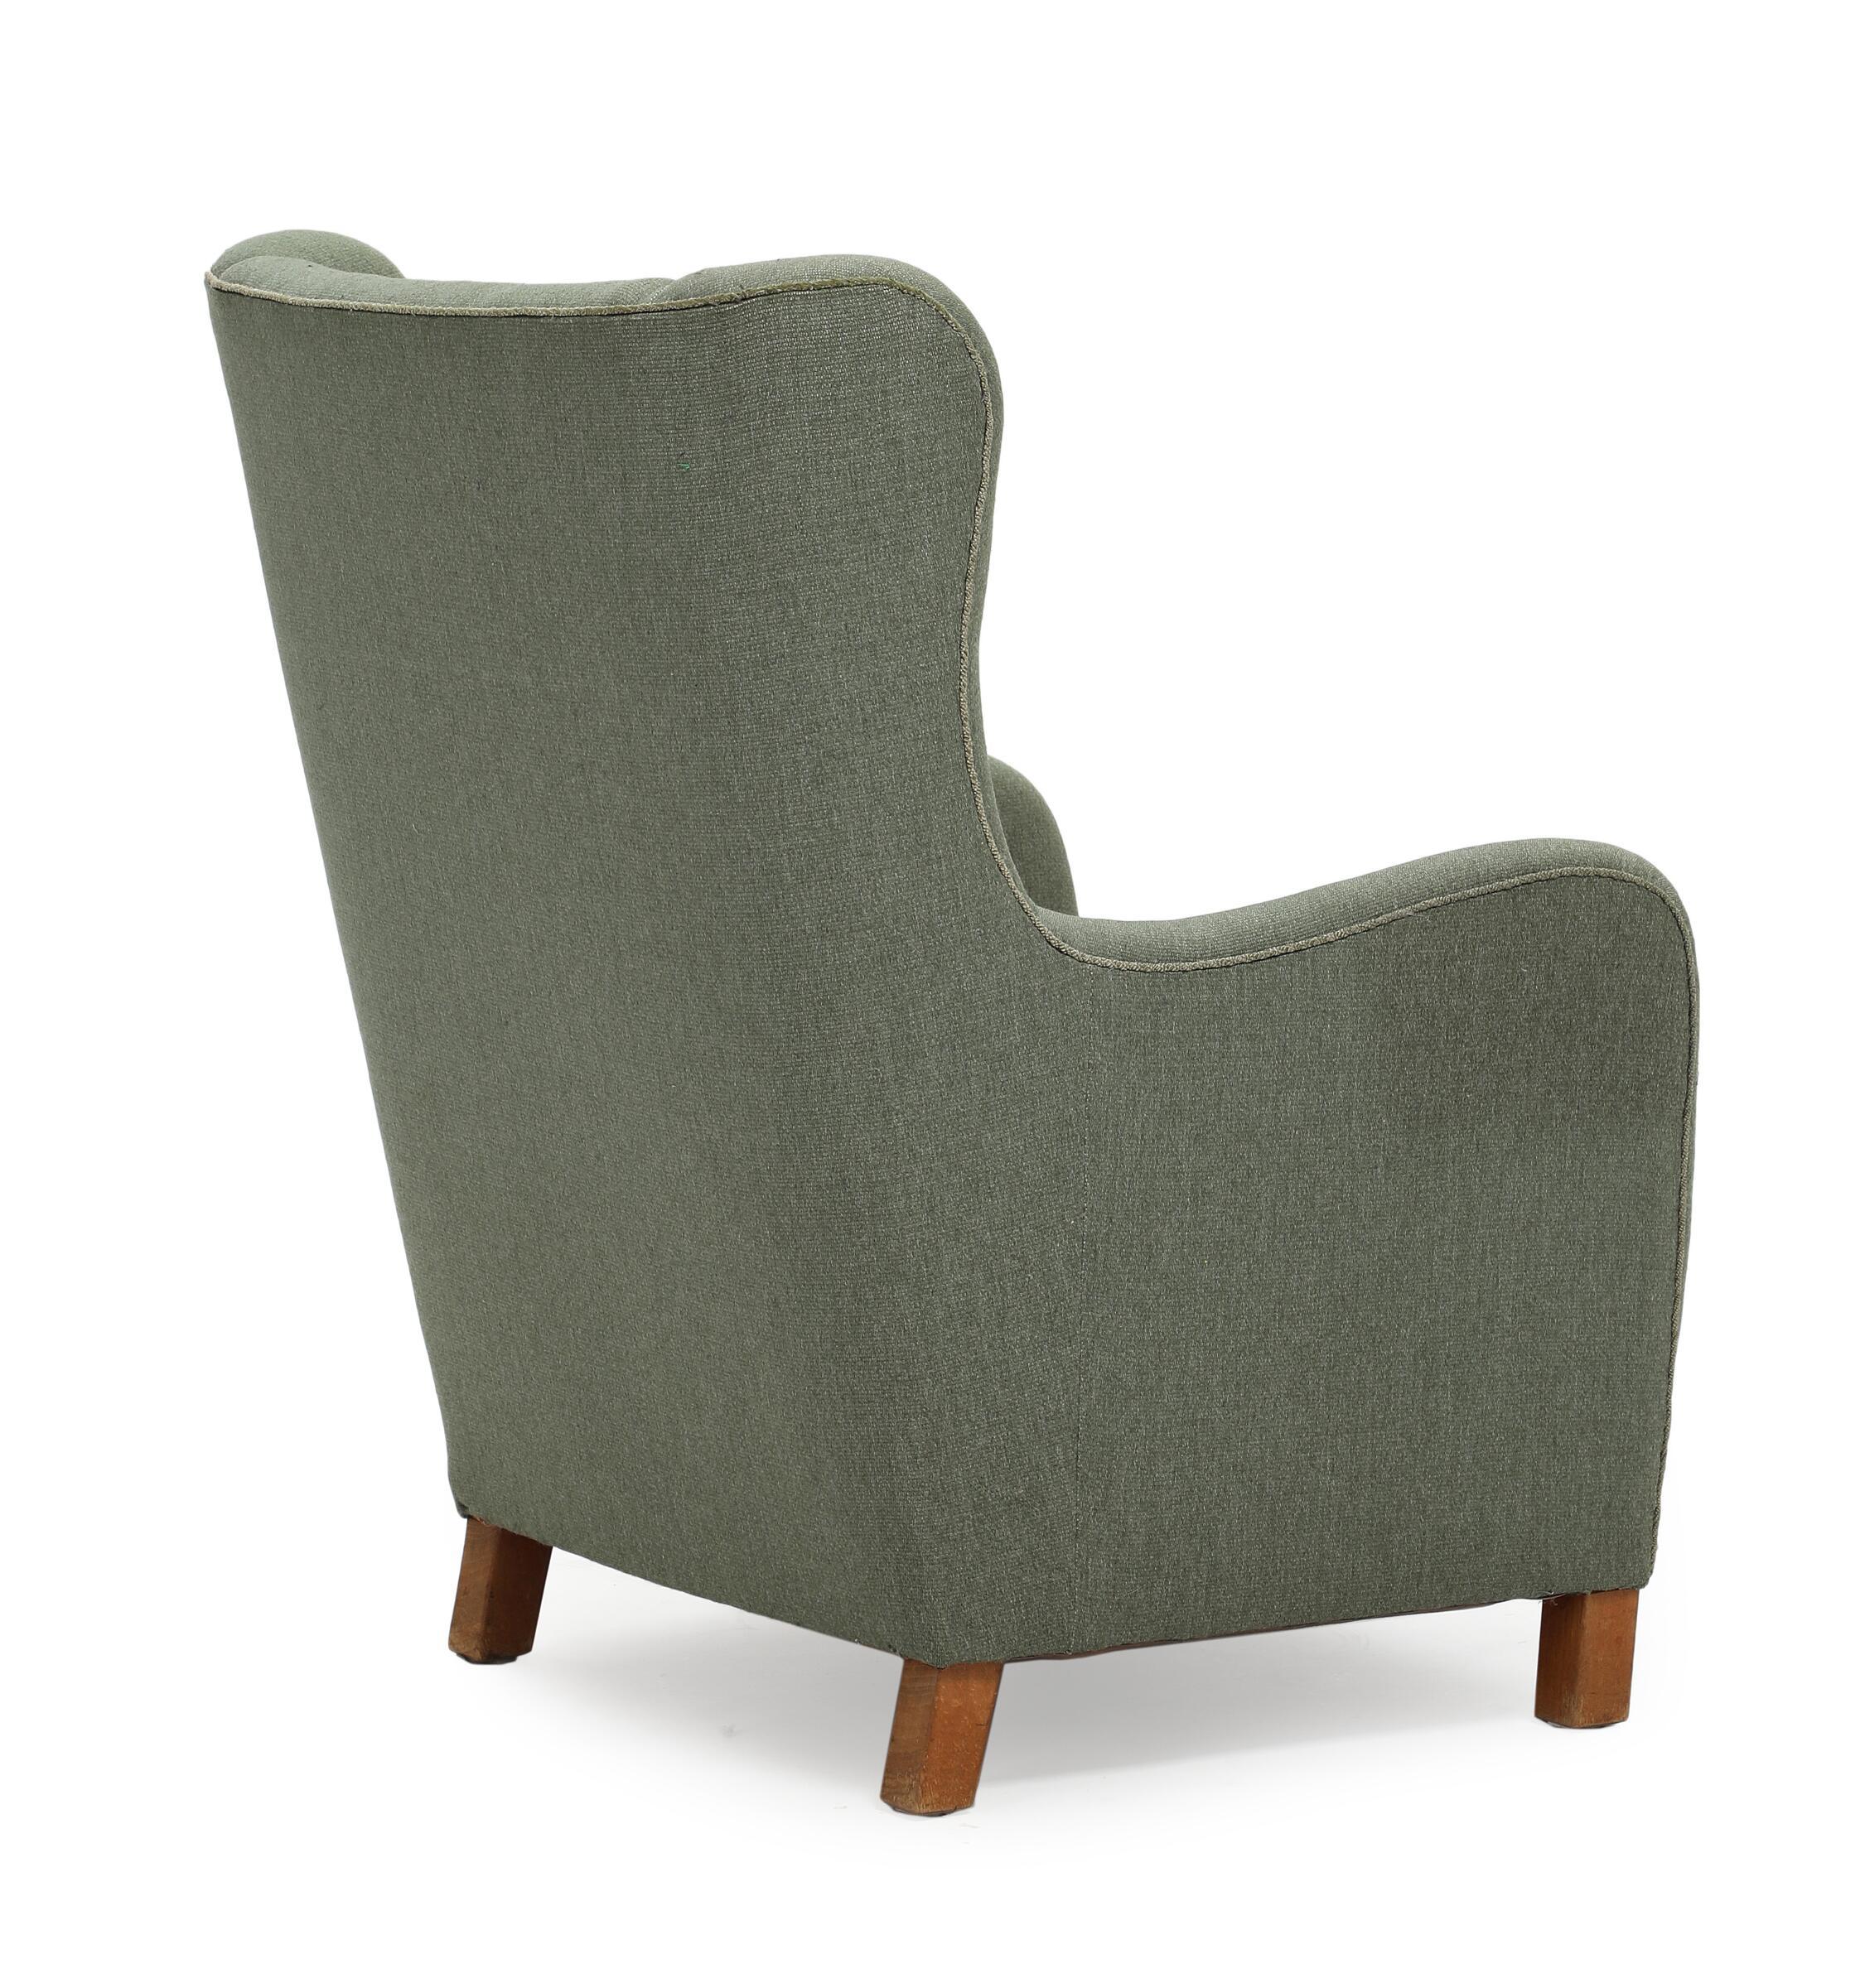 Danish green wool easy chair with beech wood legs. 1930–40s.

Wear due to age and use. Marks and scratches. Upholstery with stains and dirt.